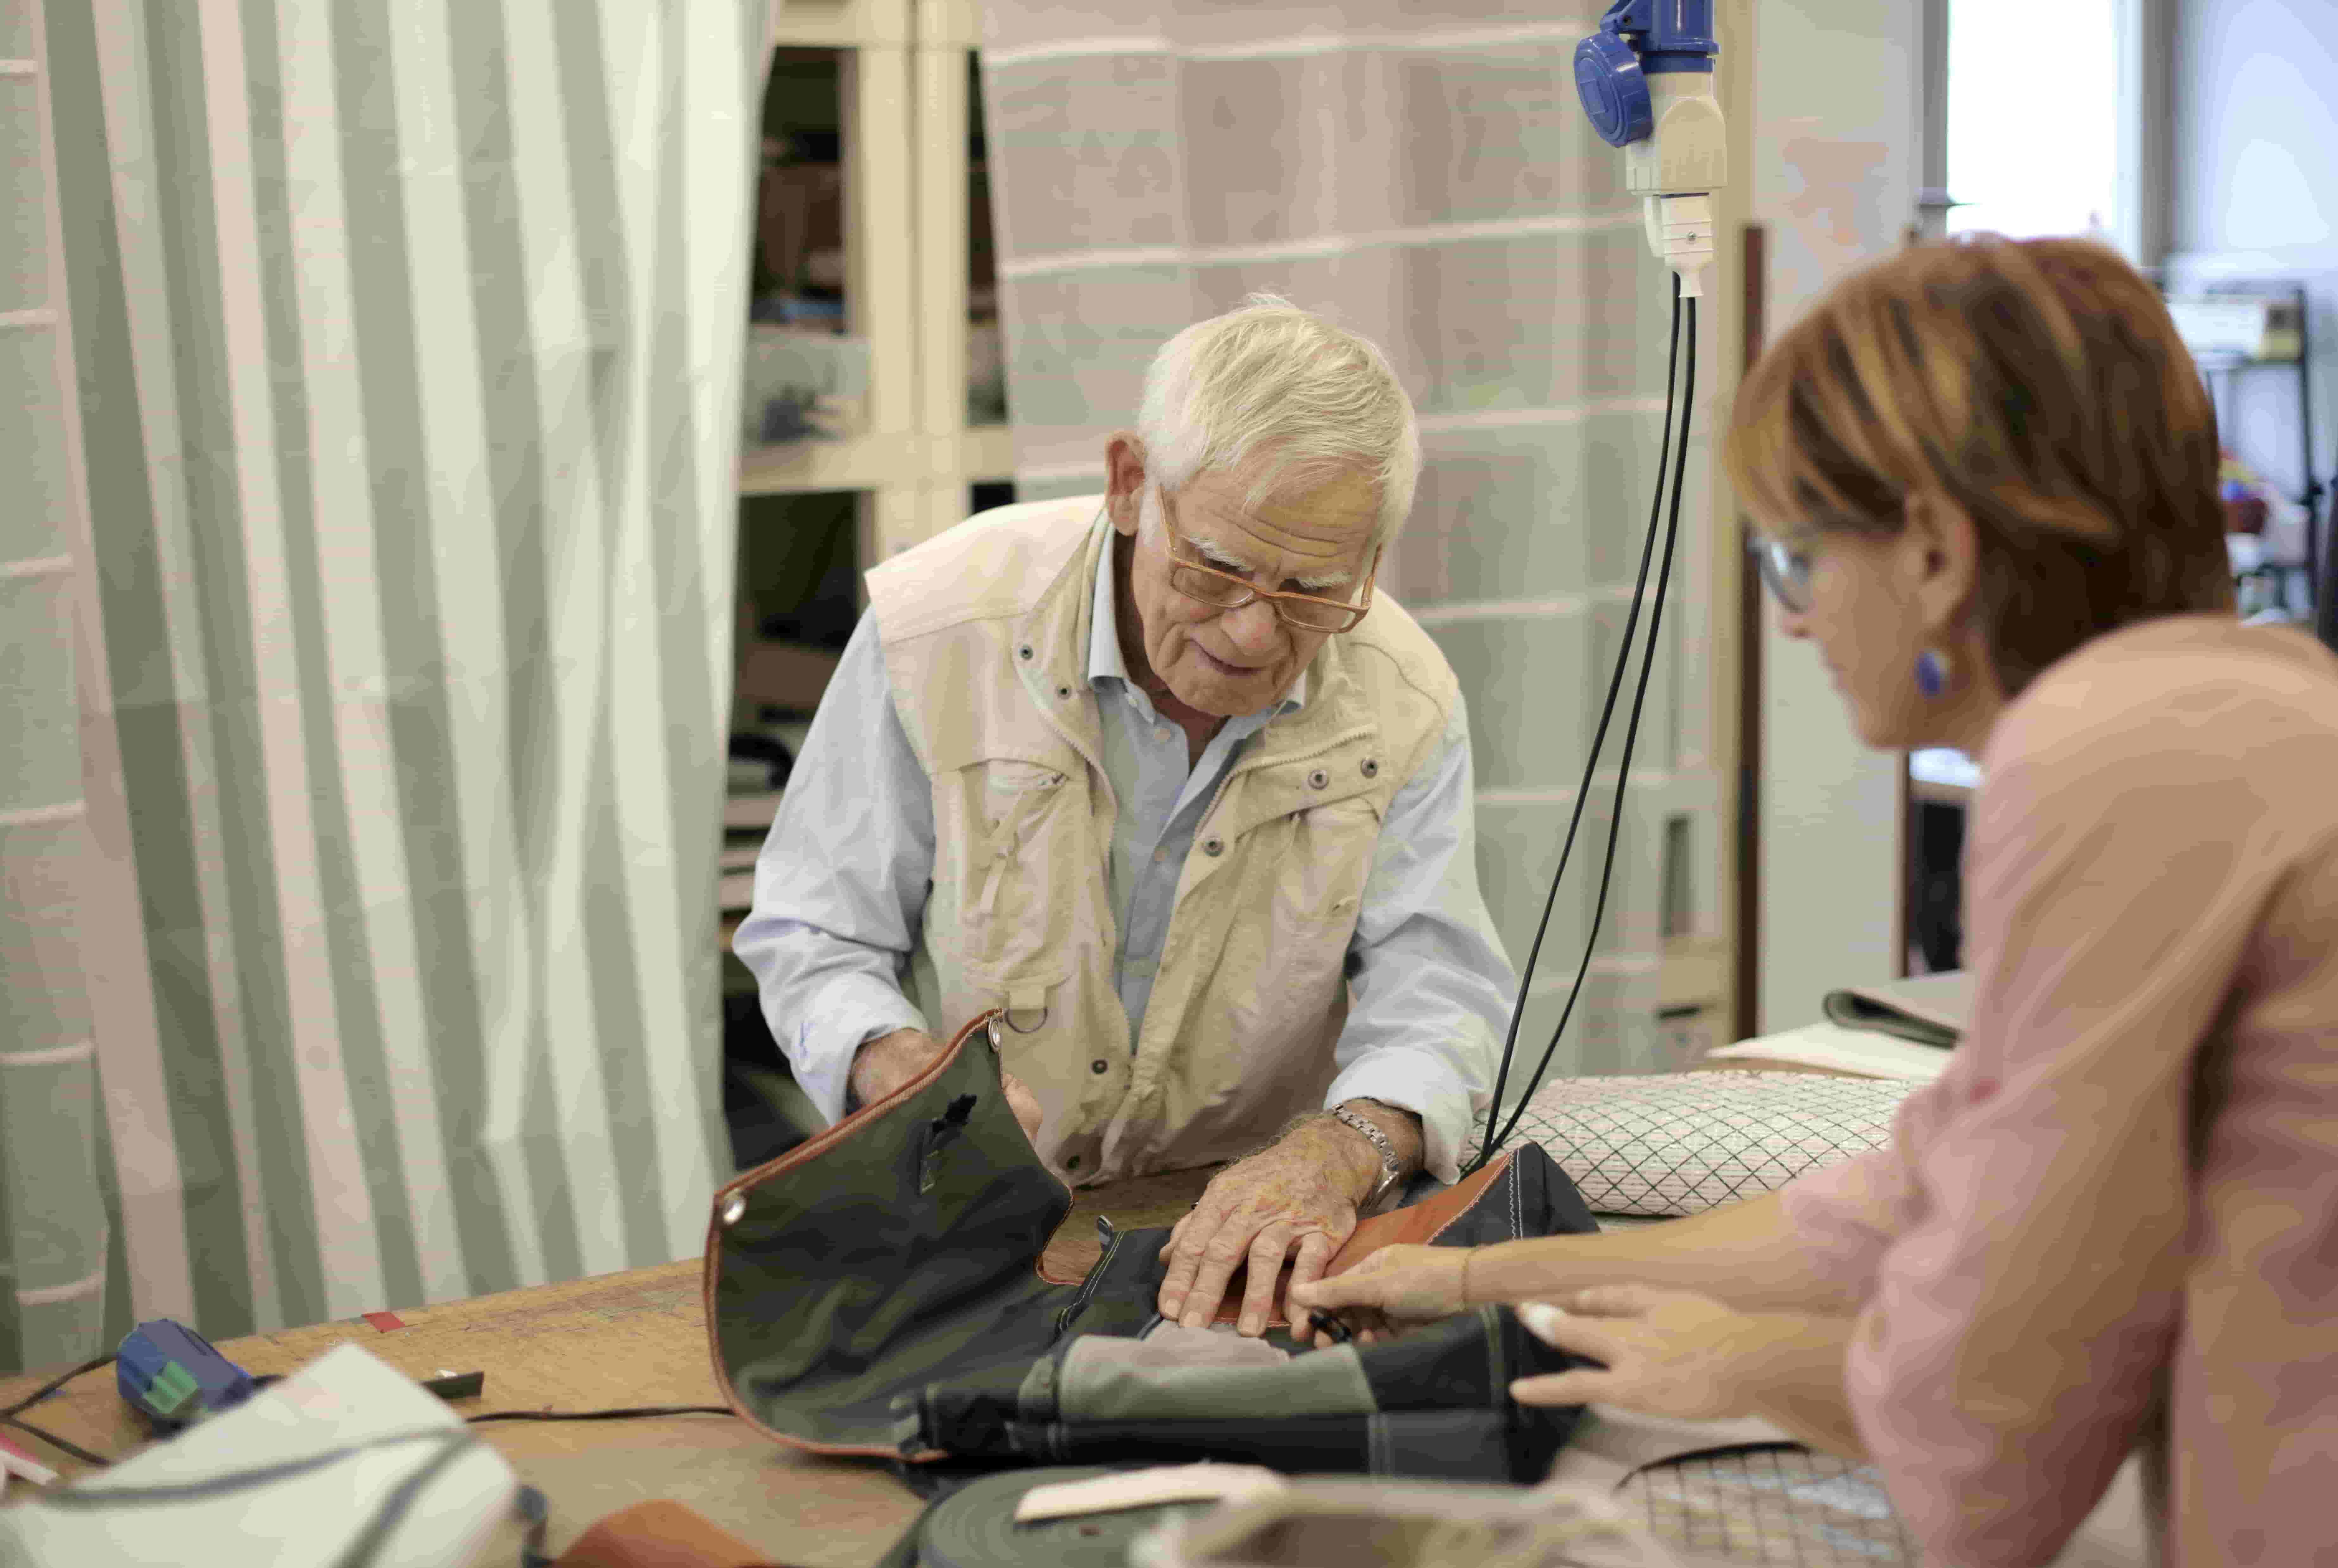 An elderly man performing a health check up